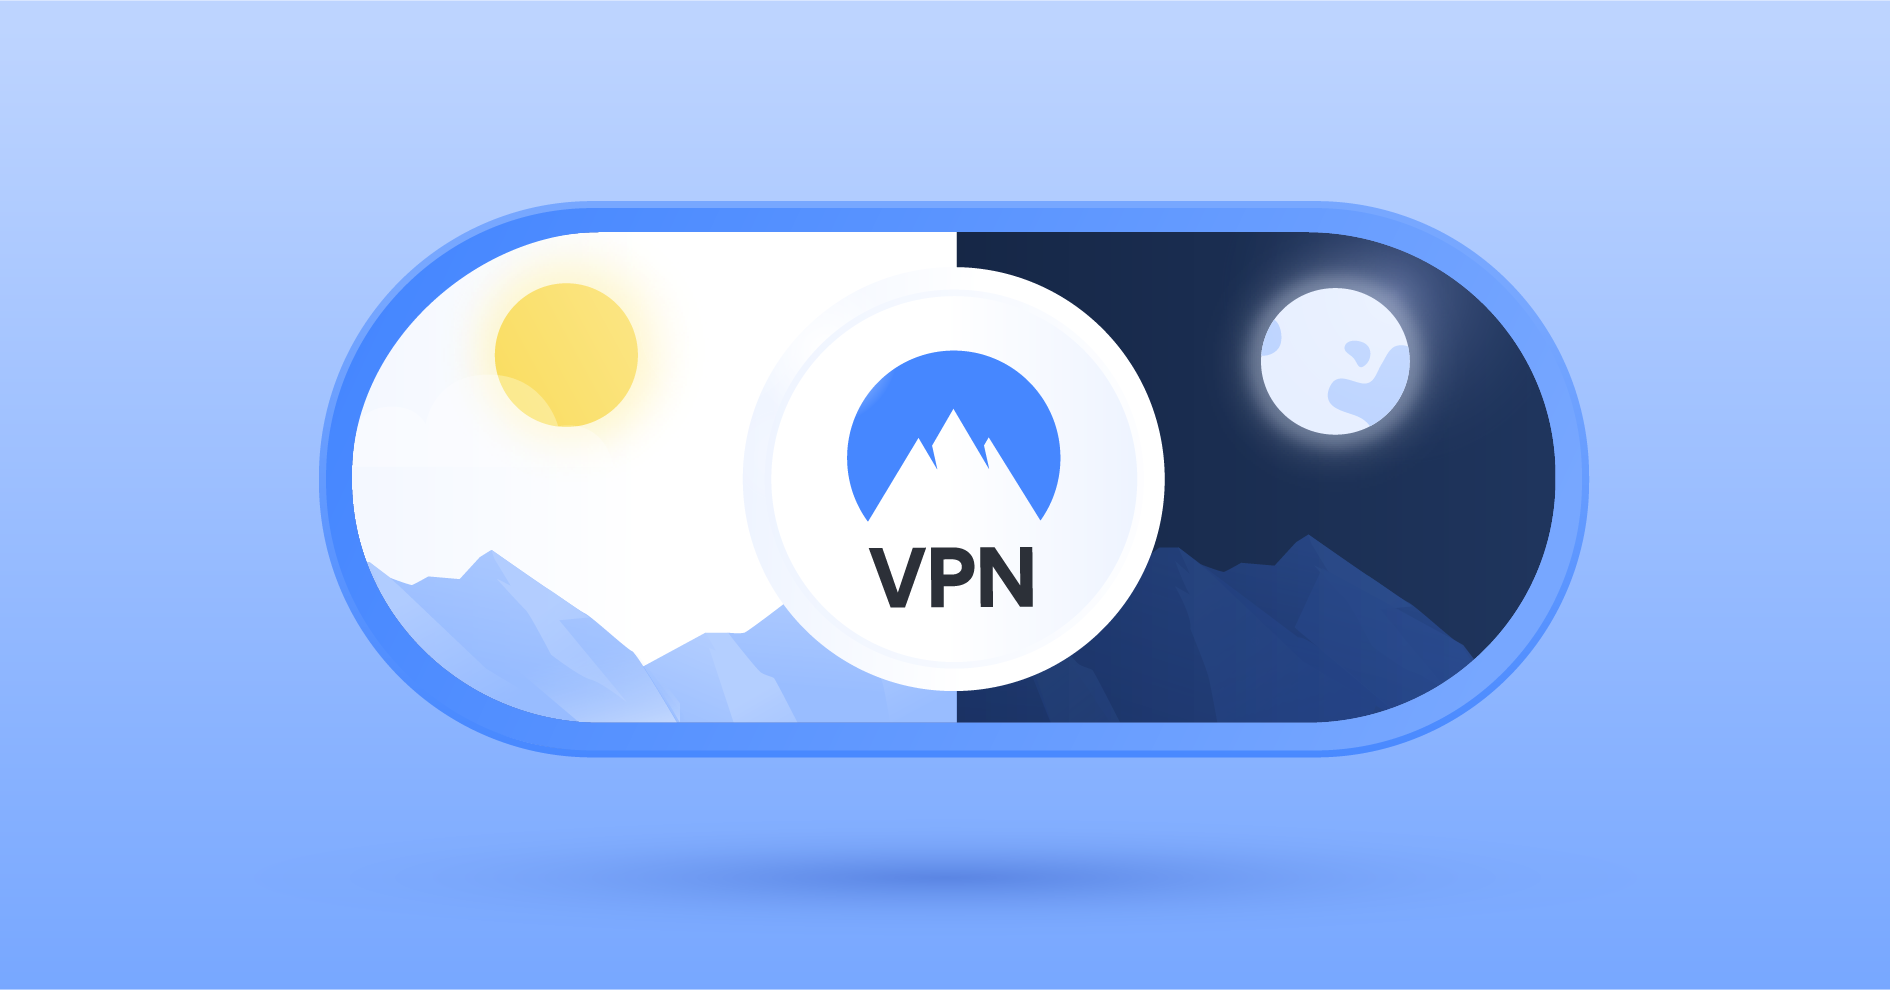 Should I leave my VPN on all the time?